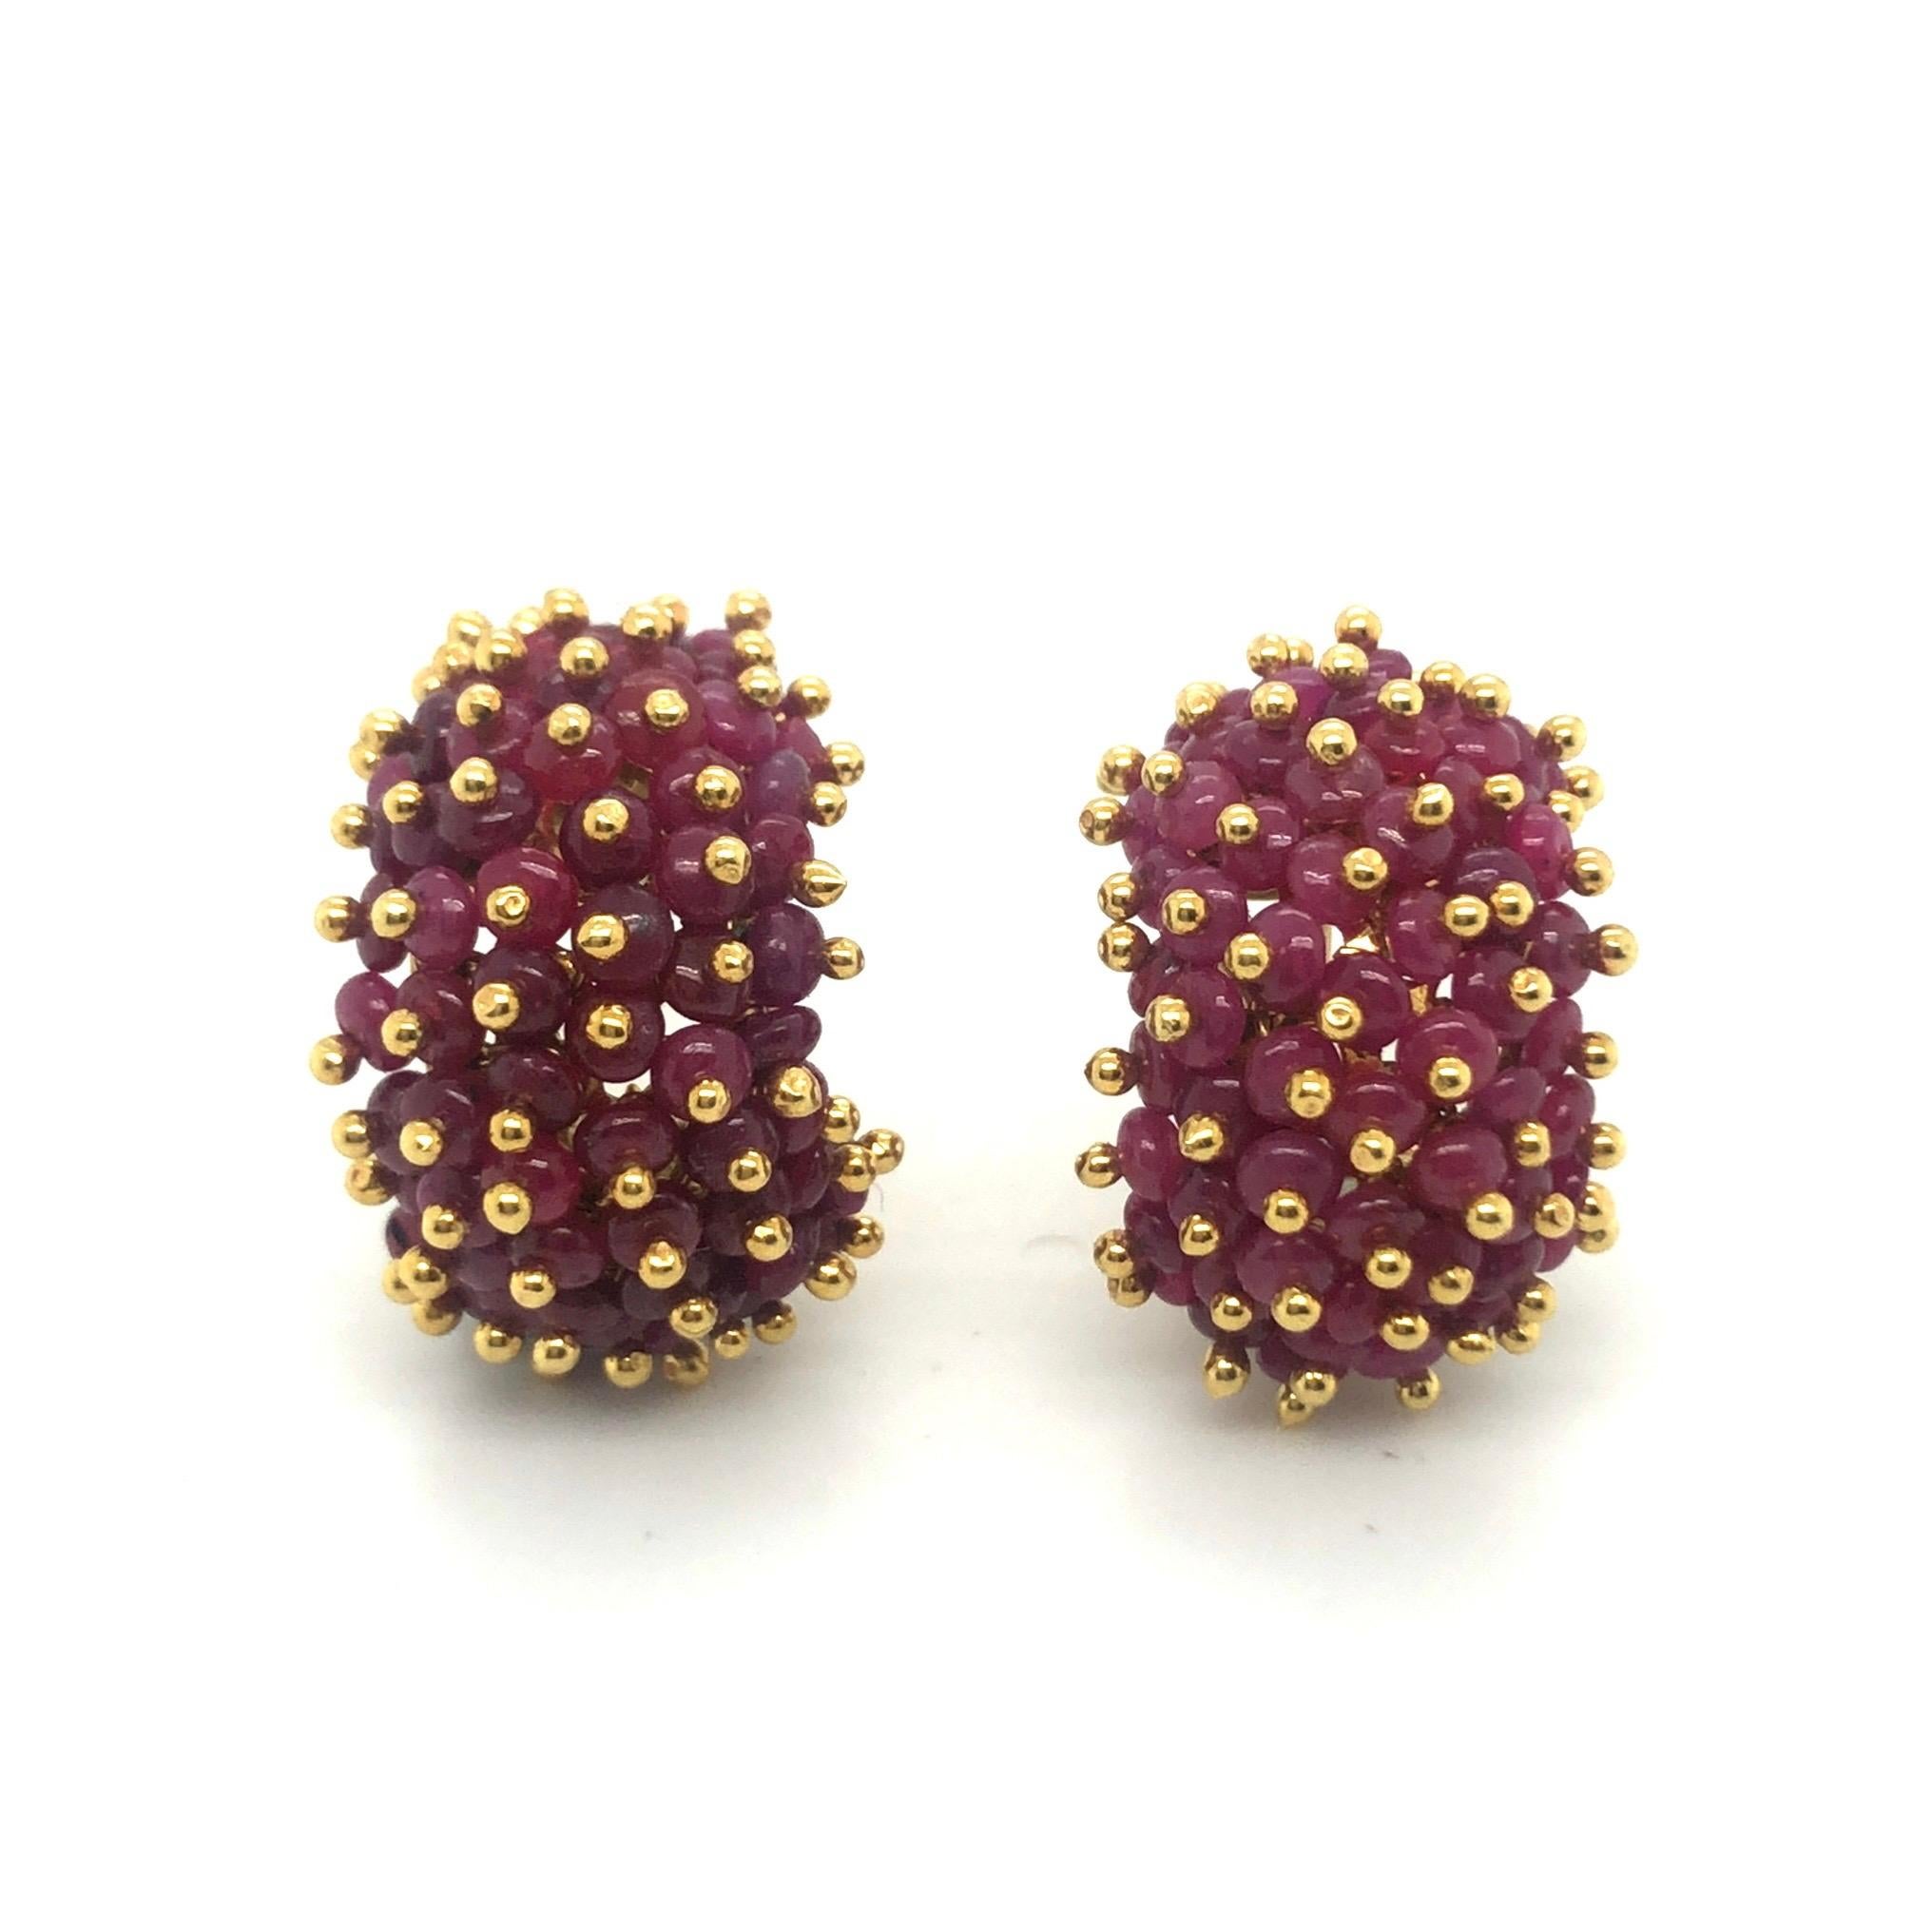 Captivating 18 karat yellow gold and rubies earrings, circa 1960s.
Designed as domed half-hoop earclips, set with ruby beads totalling circa 10 carats and enhanced with gold beads. They are completed by hinged omega-backs and fine studs to provide